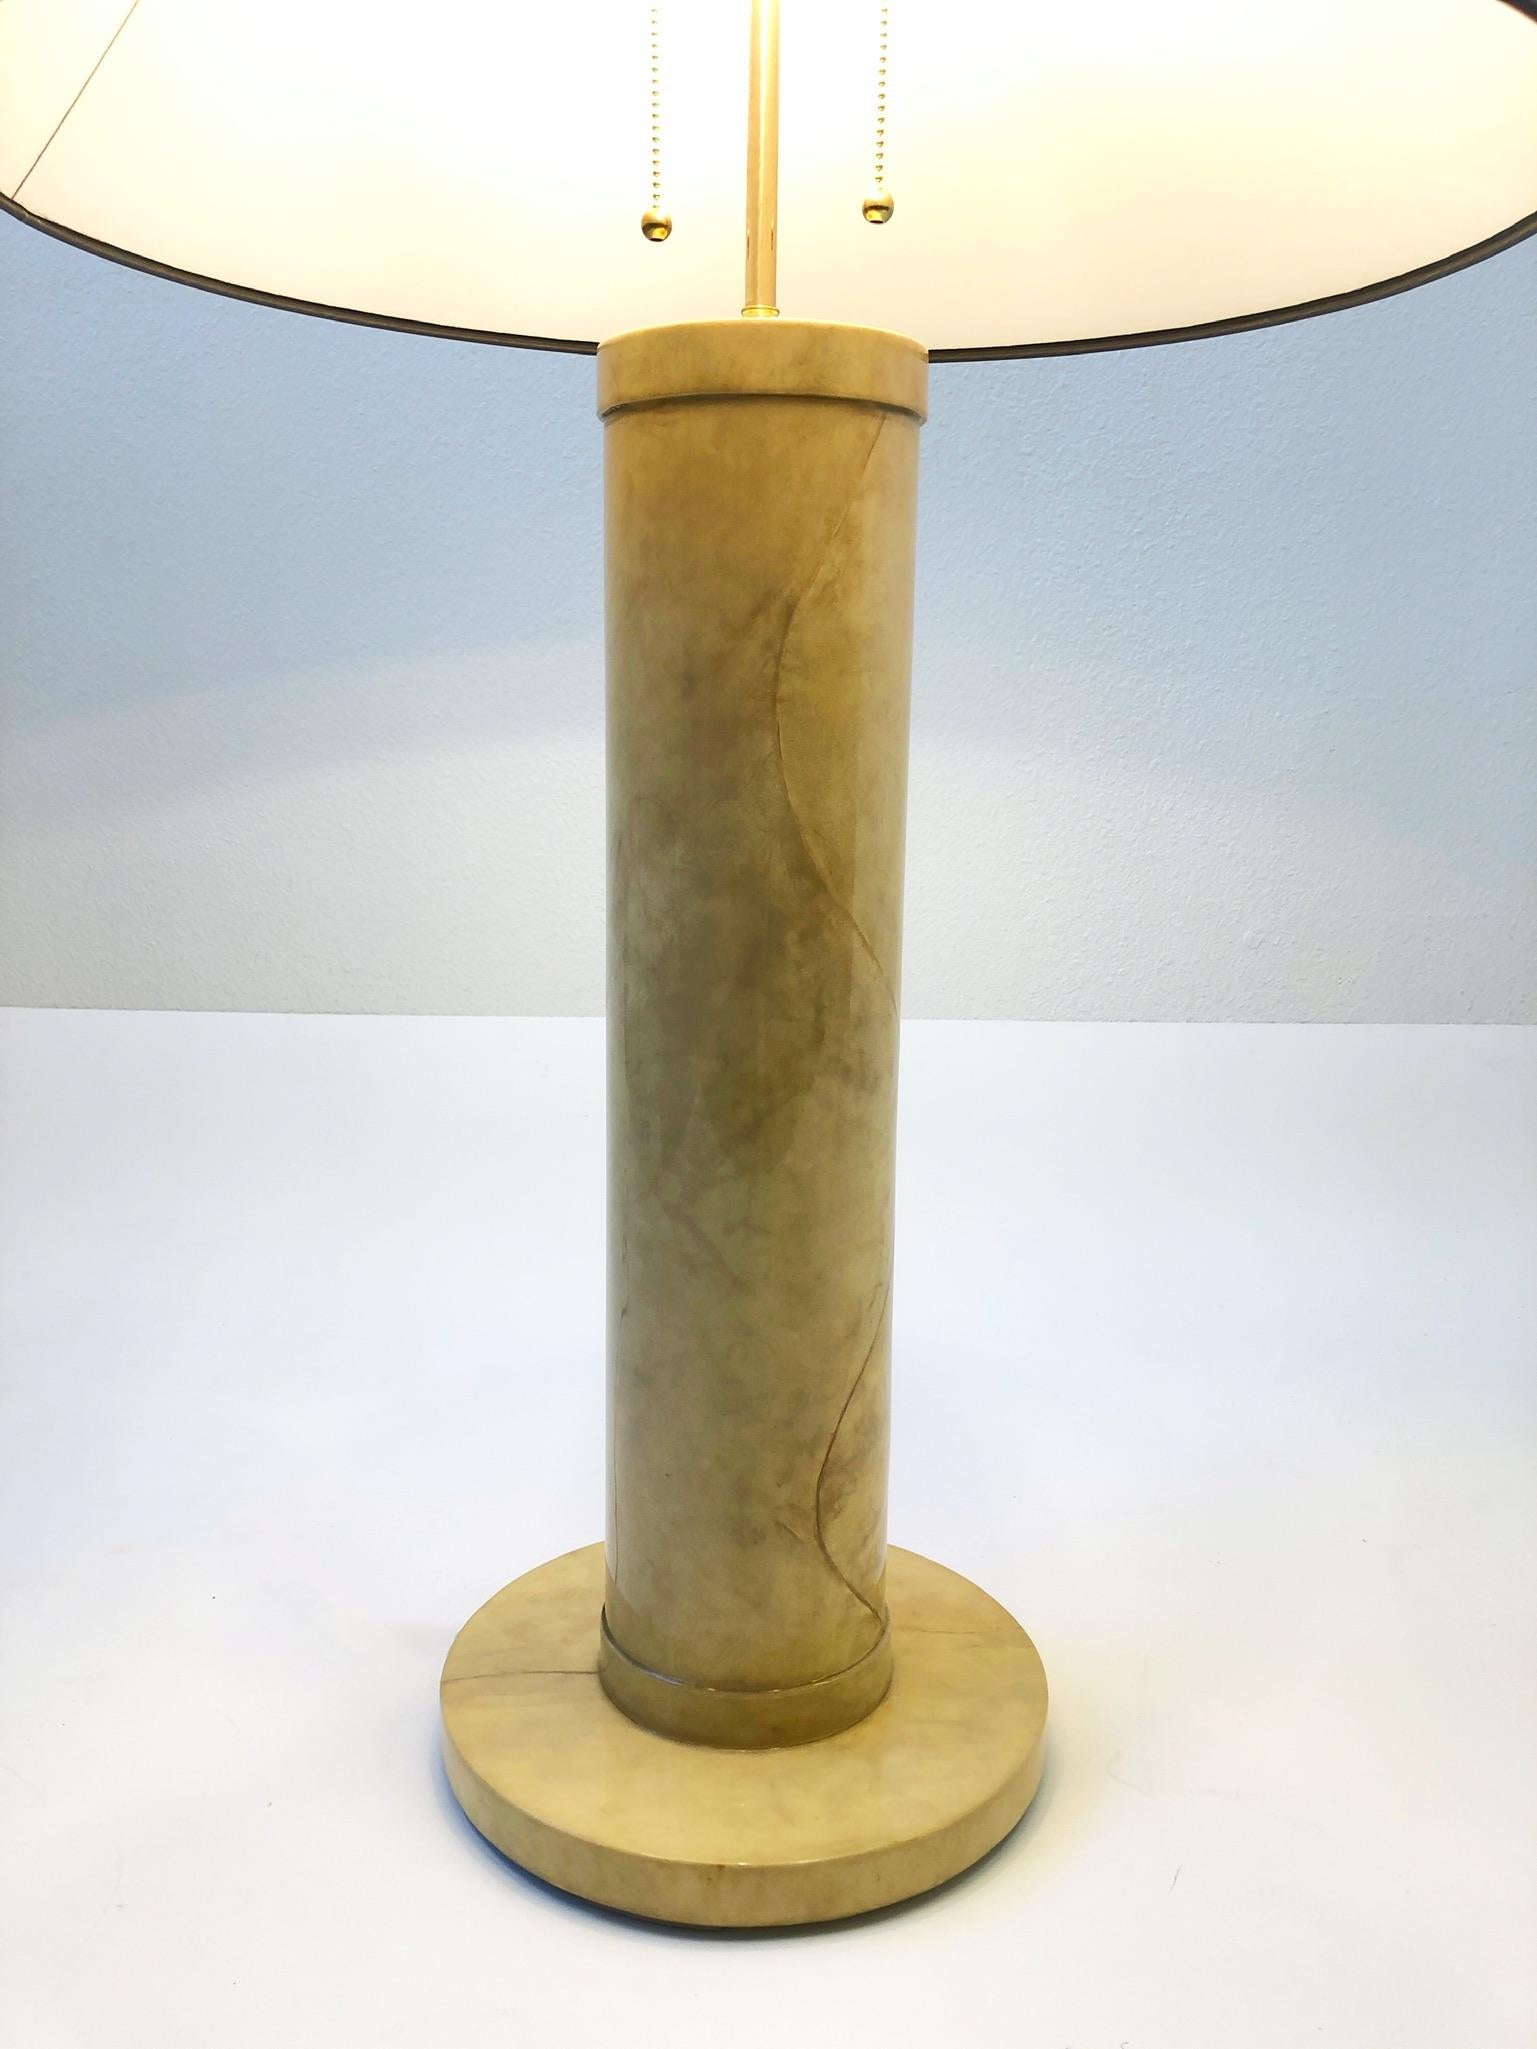 American Goatskin Parchment and Brass Table Lamp by J. Robert Scott For Sale